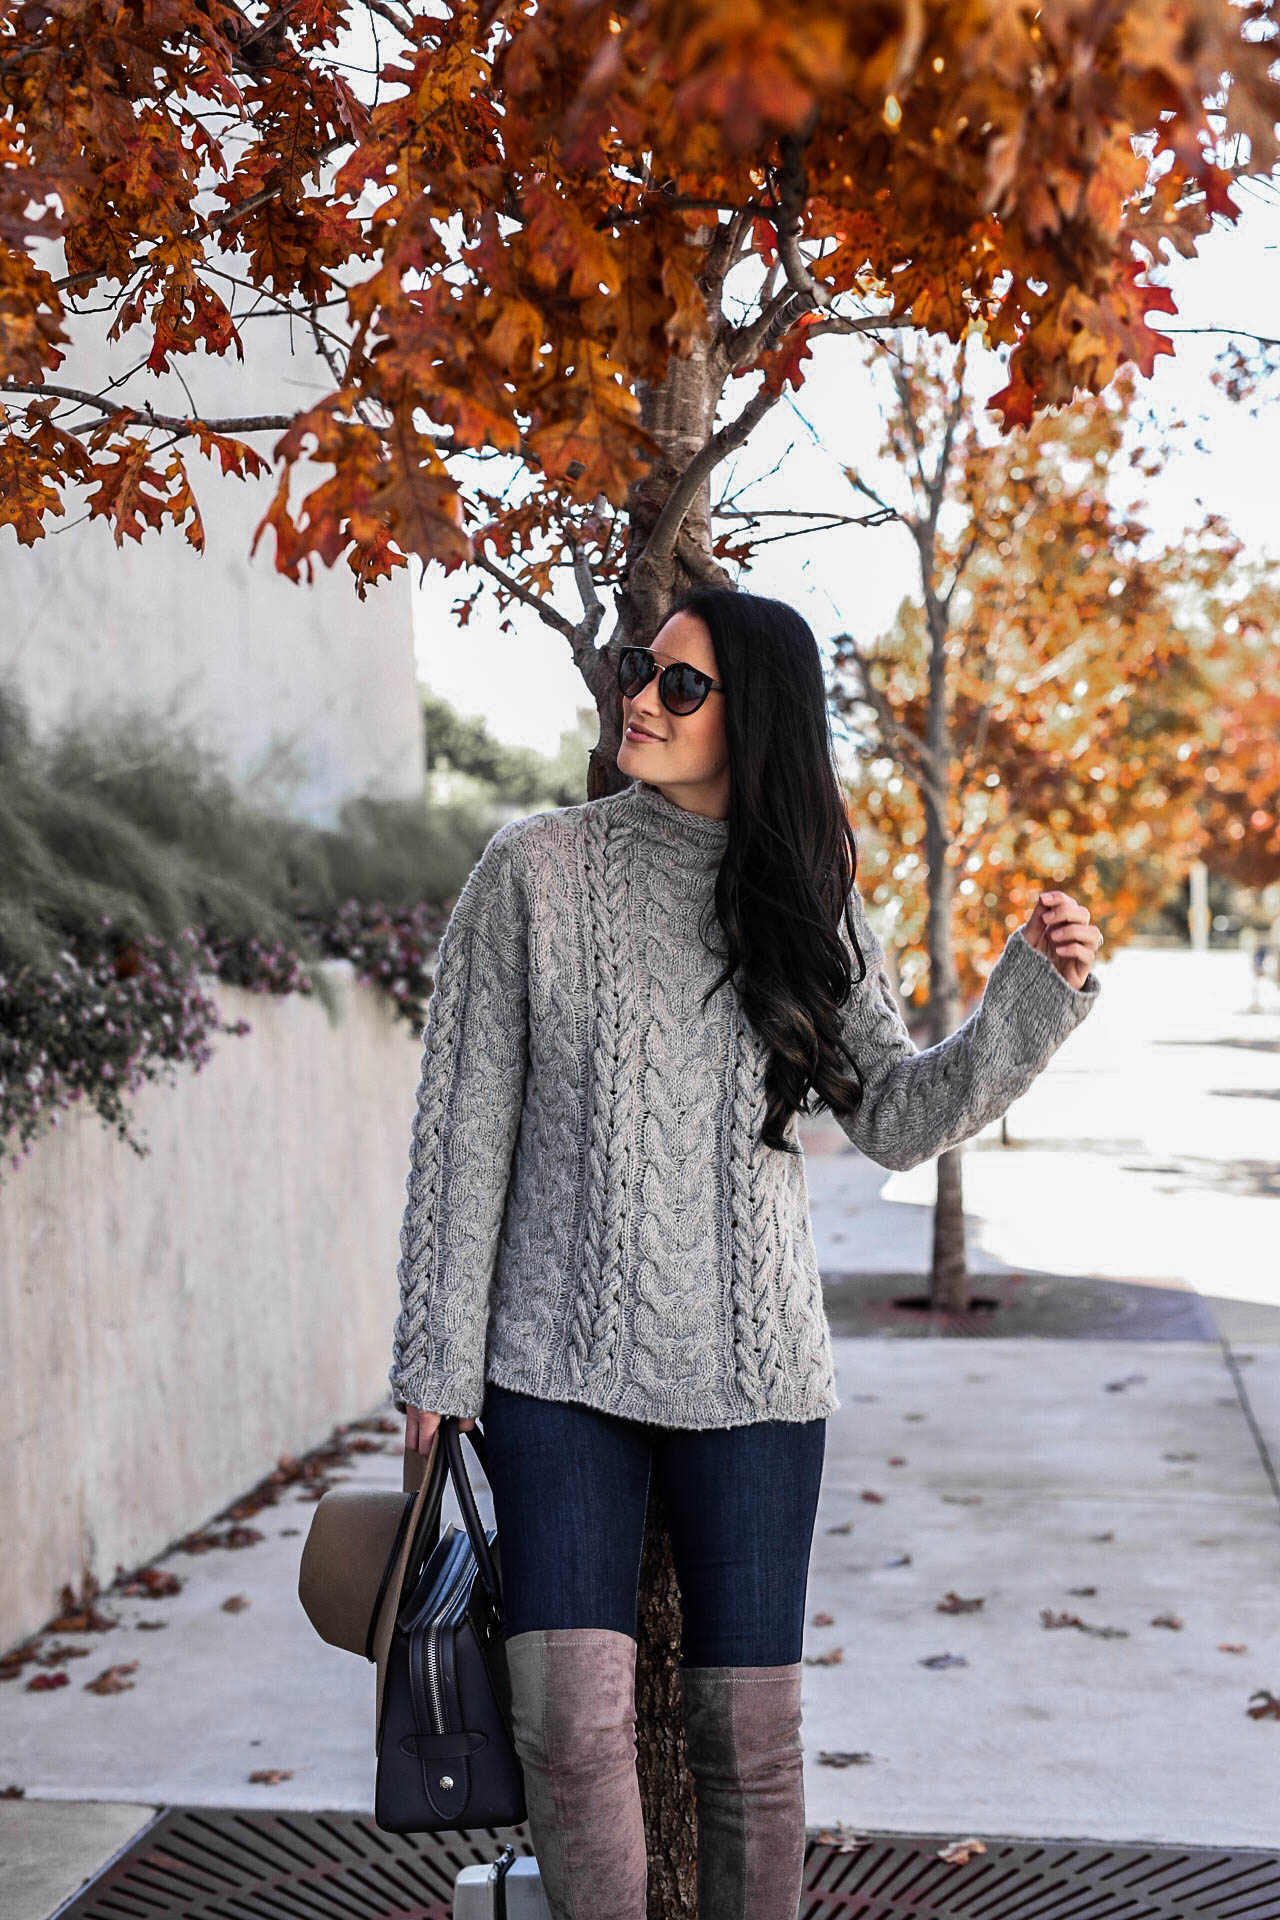 Affordable Sweaters You Need This Winter Under $100 from Chicwish | winter sweaters | affordable winter sweaters | winter fashion tips | what to wear for winter || Dressed to Kill #sweaterweather #wintersweaters #affordablesweaters - Chicwish Winter Sweaters Under $100 by Austin fashion blogger Dressed to Kill